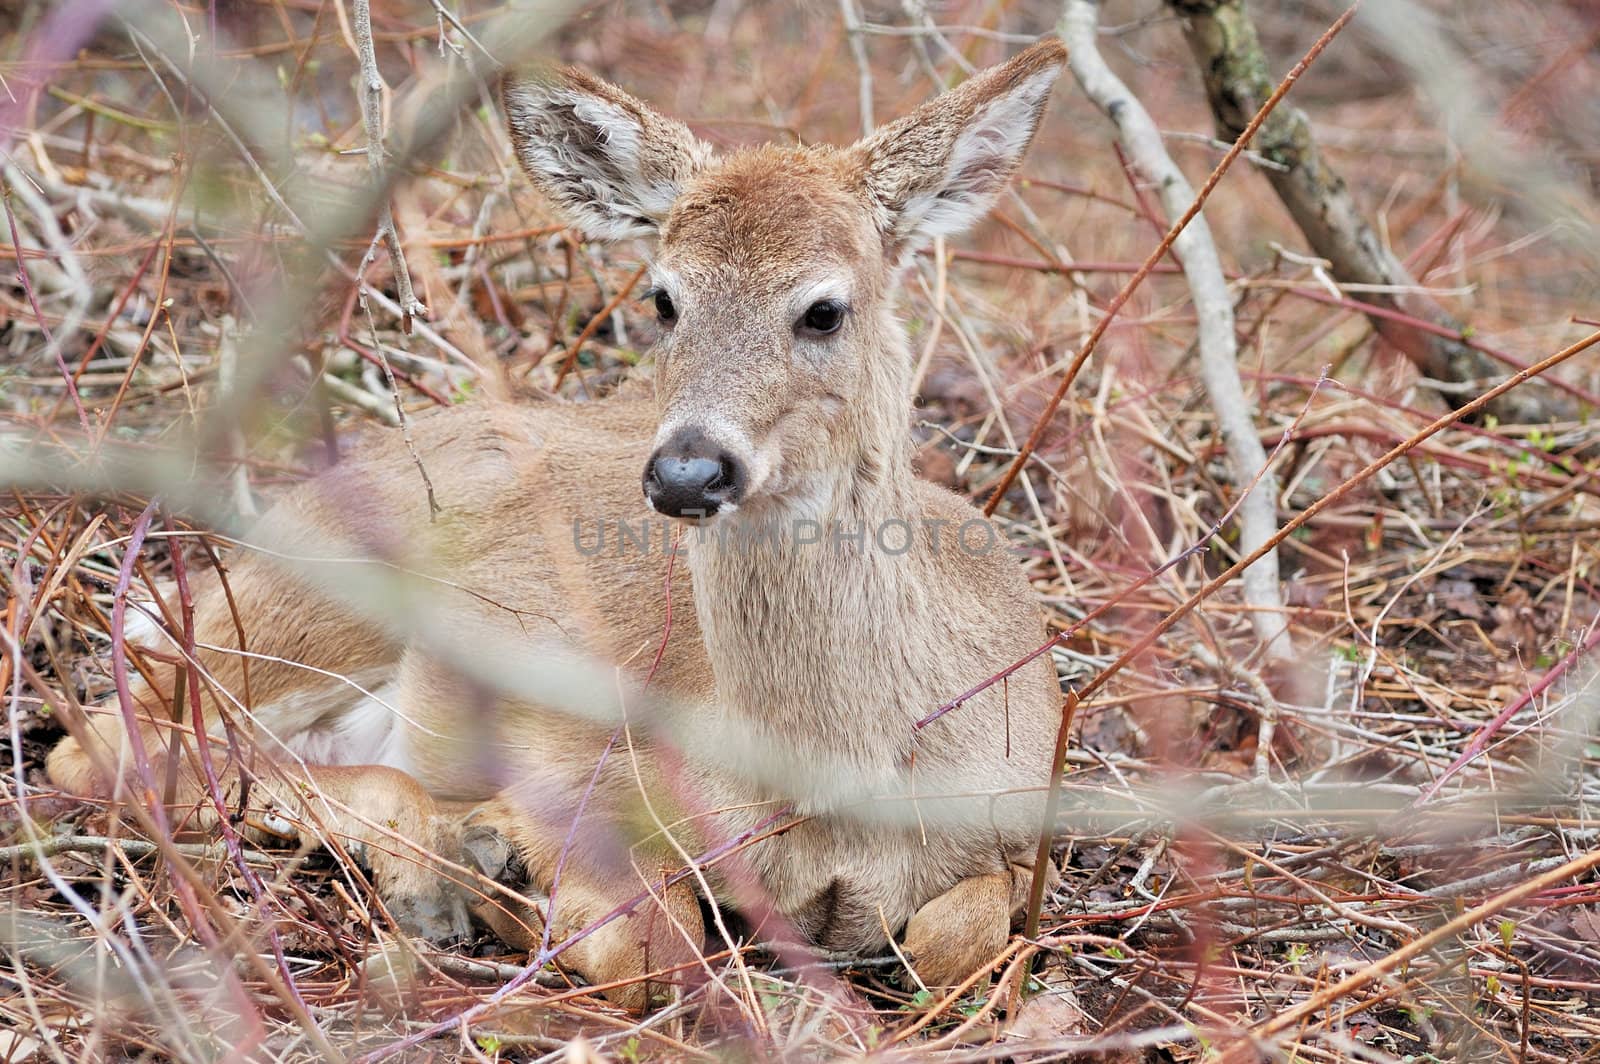 Whitetail deer yearling bedded in a thicket.